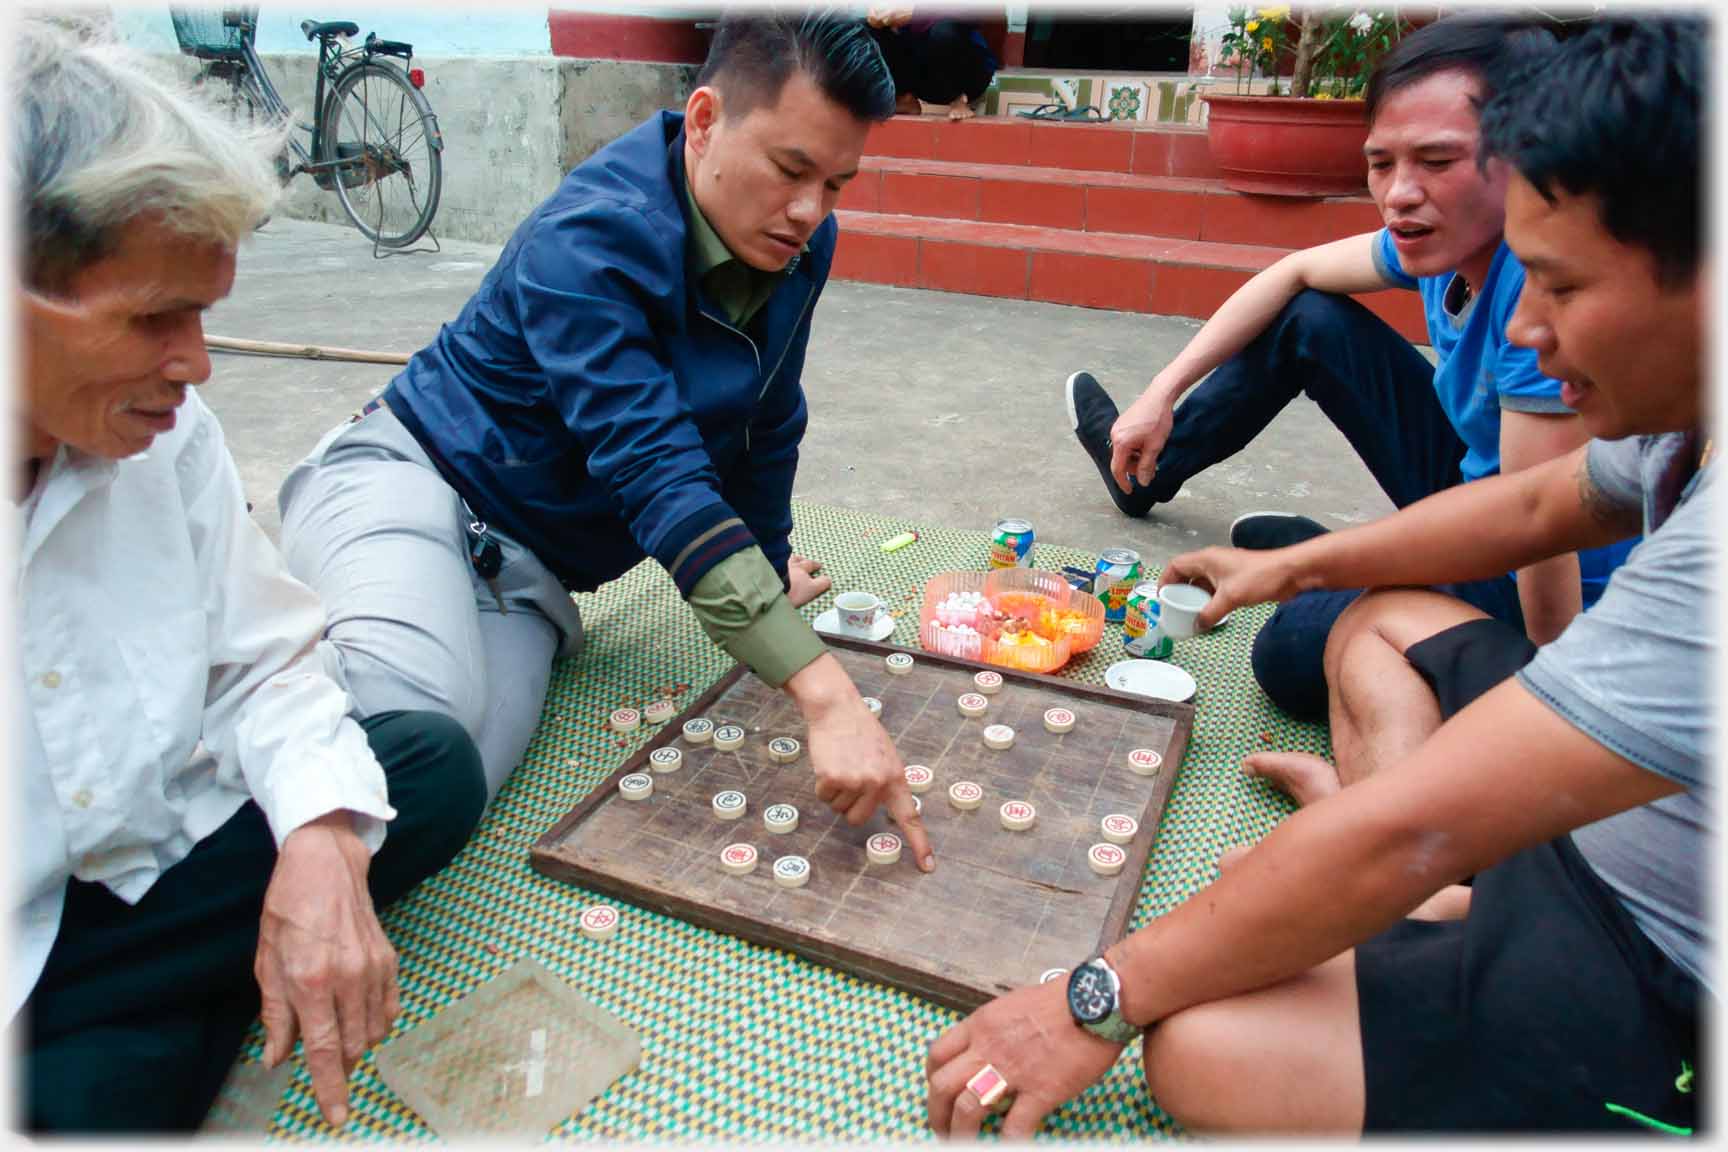 Four men on mat playing and watching a game.